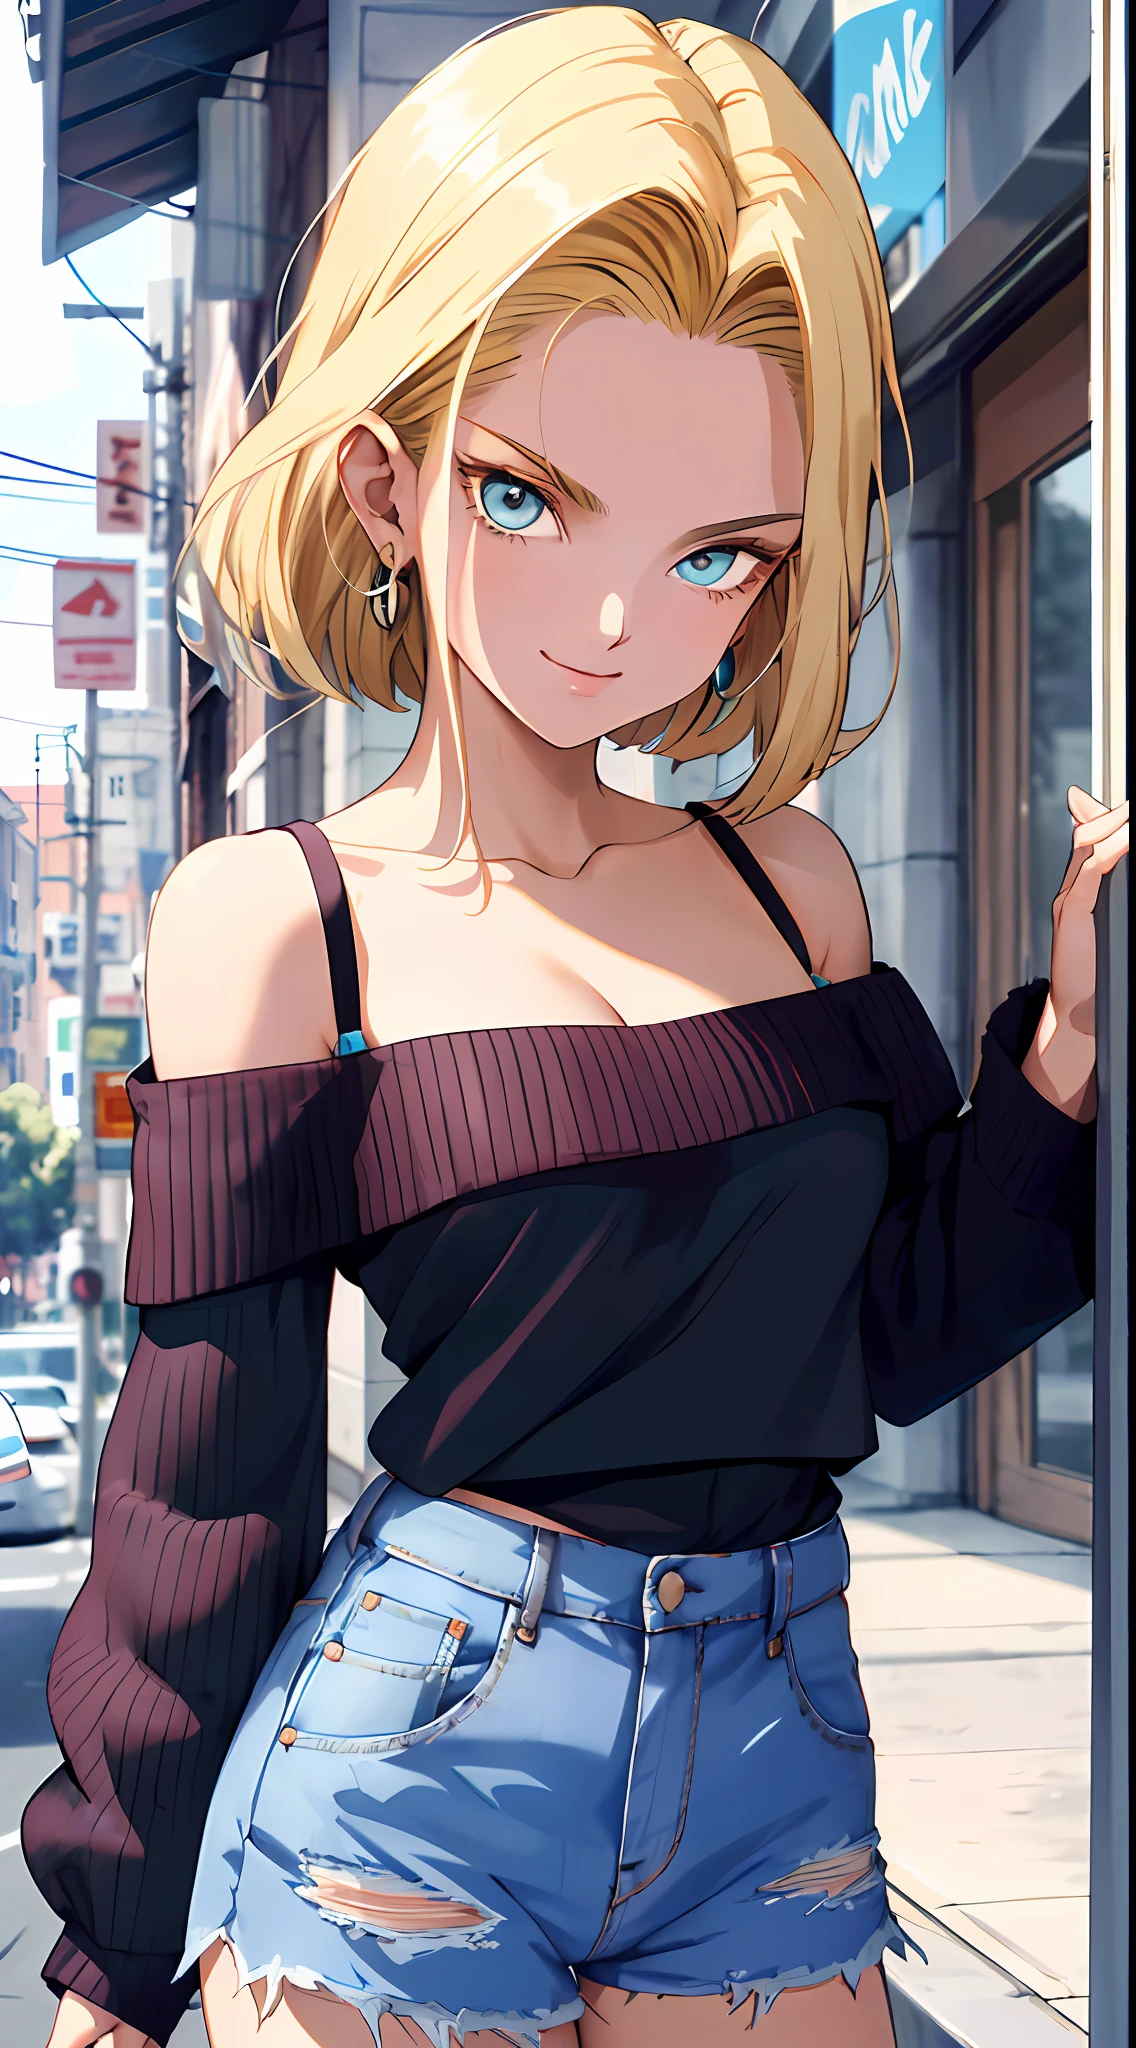 tmasterpiece， Best quality at best， ultra - detailed， absurderes， Portrait beautiful Android18DB， solo， 耳Nipple Ring， (Bikini:1.5)，underdressing，jewely， (Off-the-shoulder attire:1.5)，cleavage， upperbody closeup，ssmile， thongs， vests， ​​clouds， Skysky， daysies， exteriors，Denim super shorts，best qualtiy， tmasterpiece， intricately details， Tone-mapping， Sharp focus， ultra - detailed， Artstati is the trend，